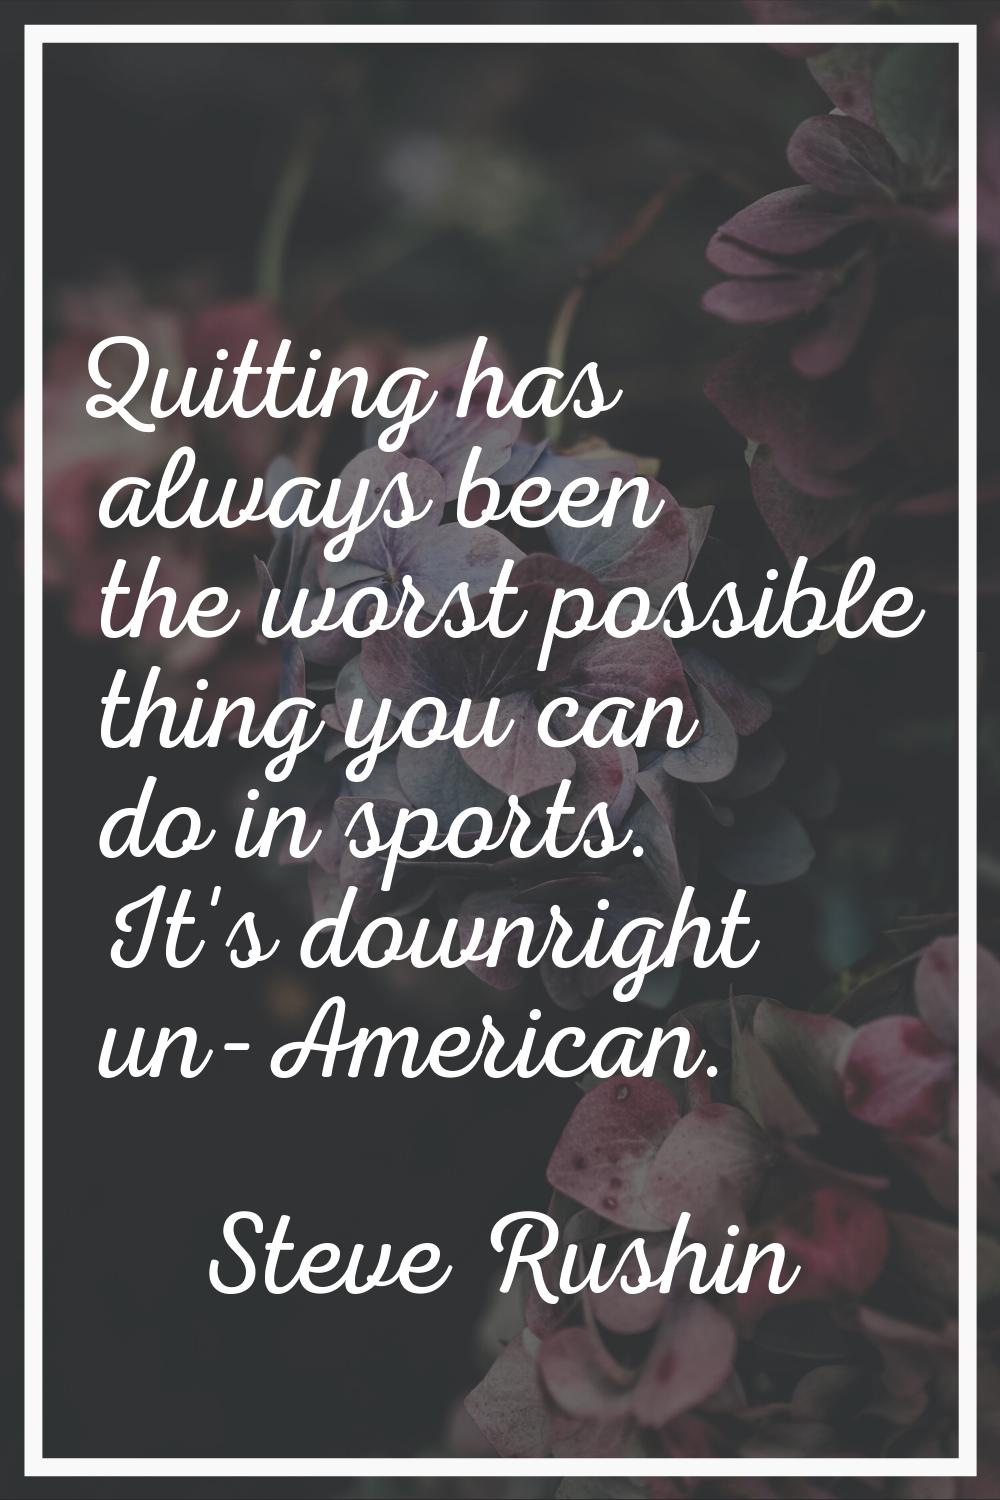 Quitting has always been the worst possible thing you can do in sports. It's downright un-American.